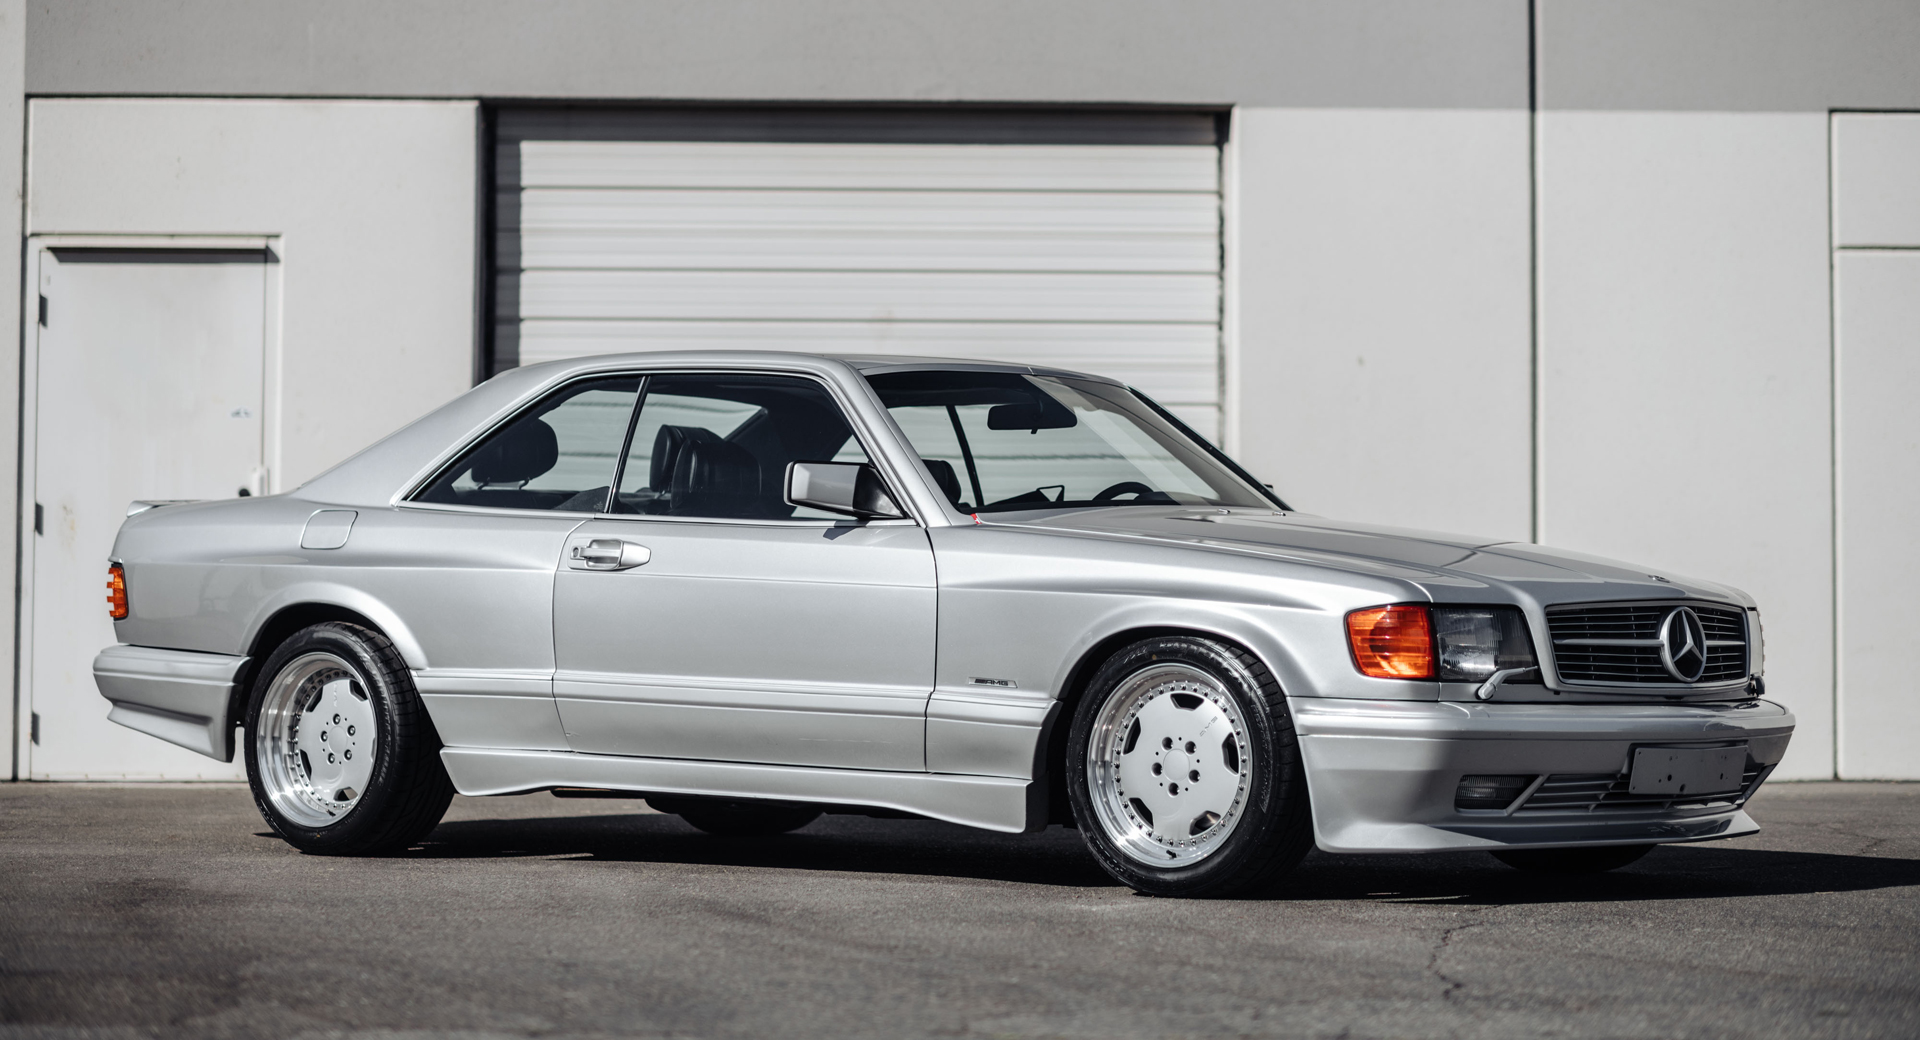 1989 Mercedes-Benz 560 SEC AMG 6.0 Widebody is bad for the bone